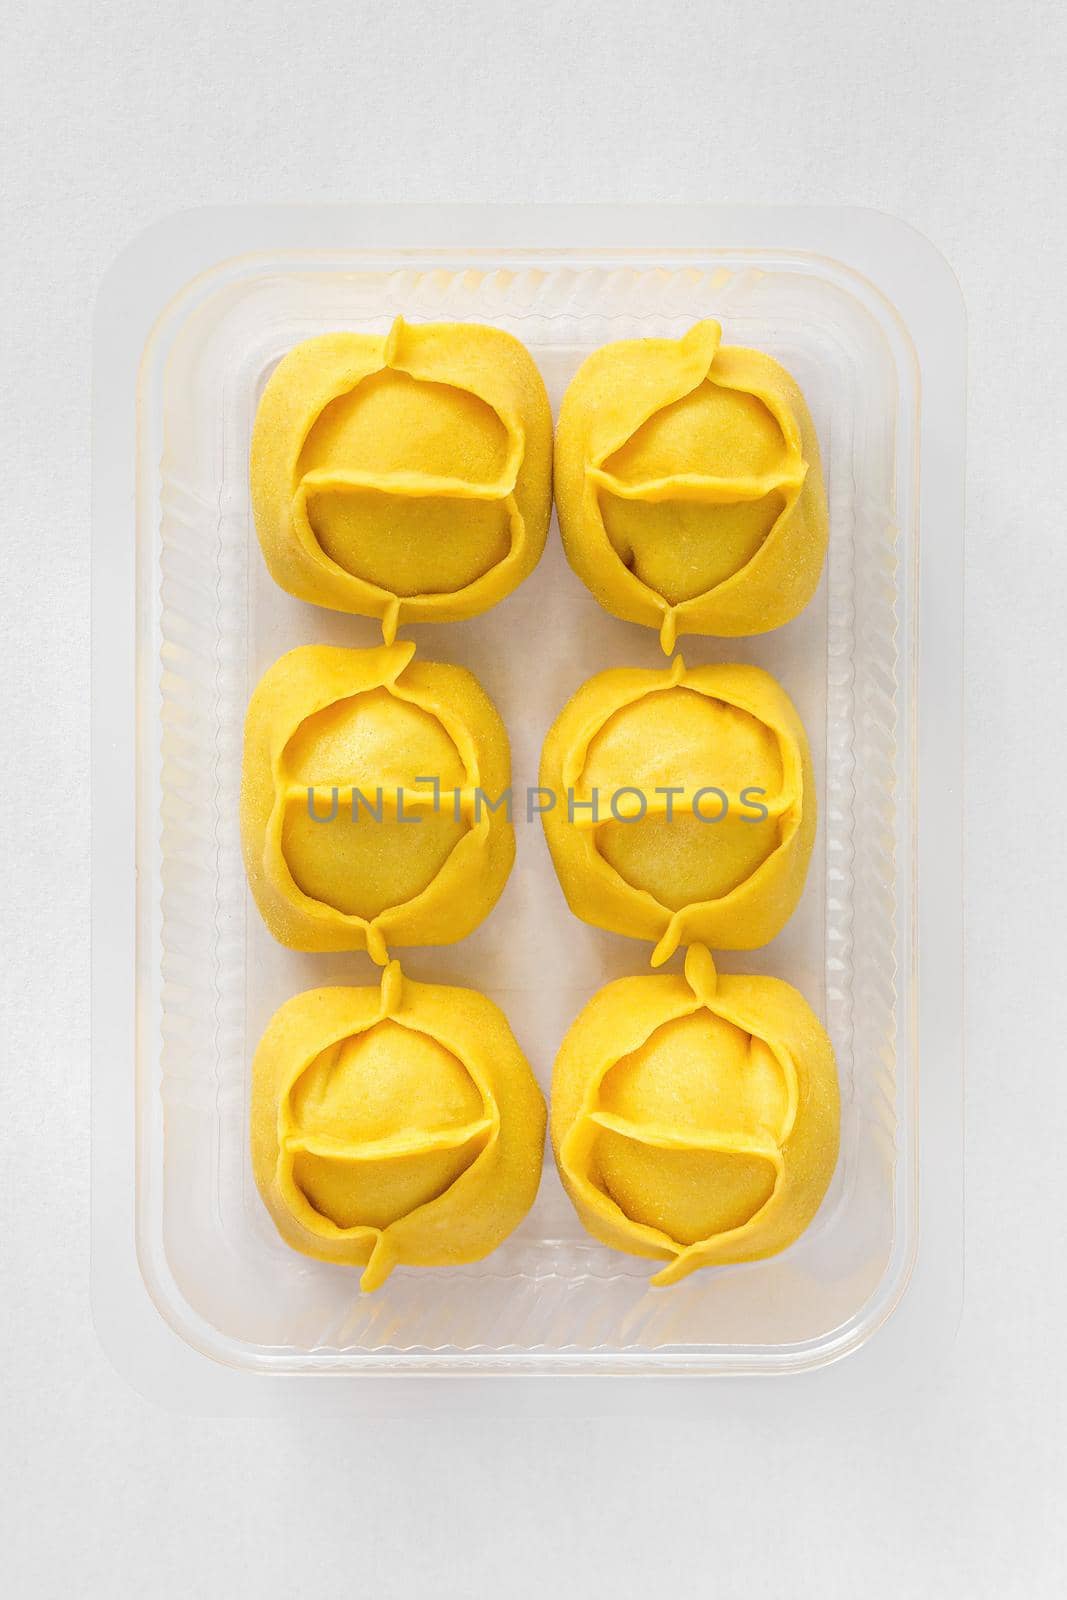 Big yellow dumplings portion in plastic container for sale. For steam cooking. Manti, Manty. Dough colored yellow with curcuma